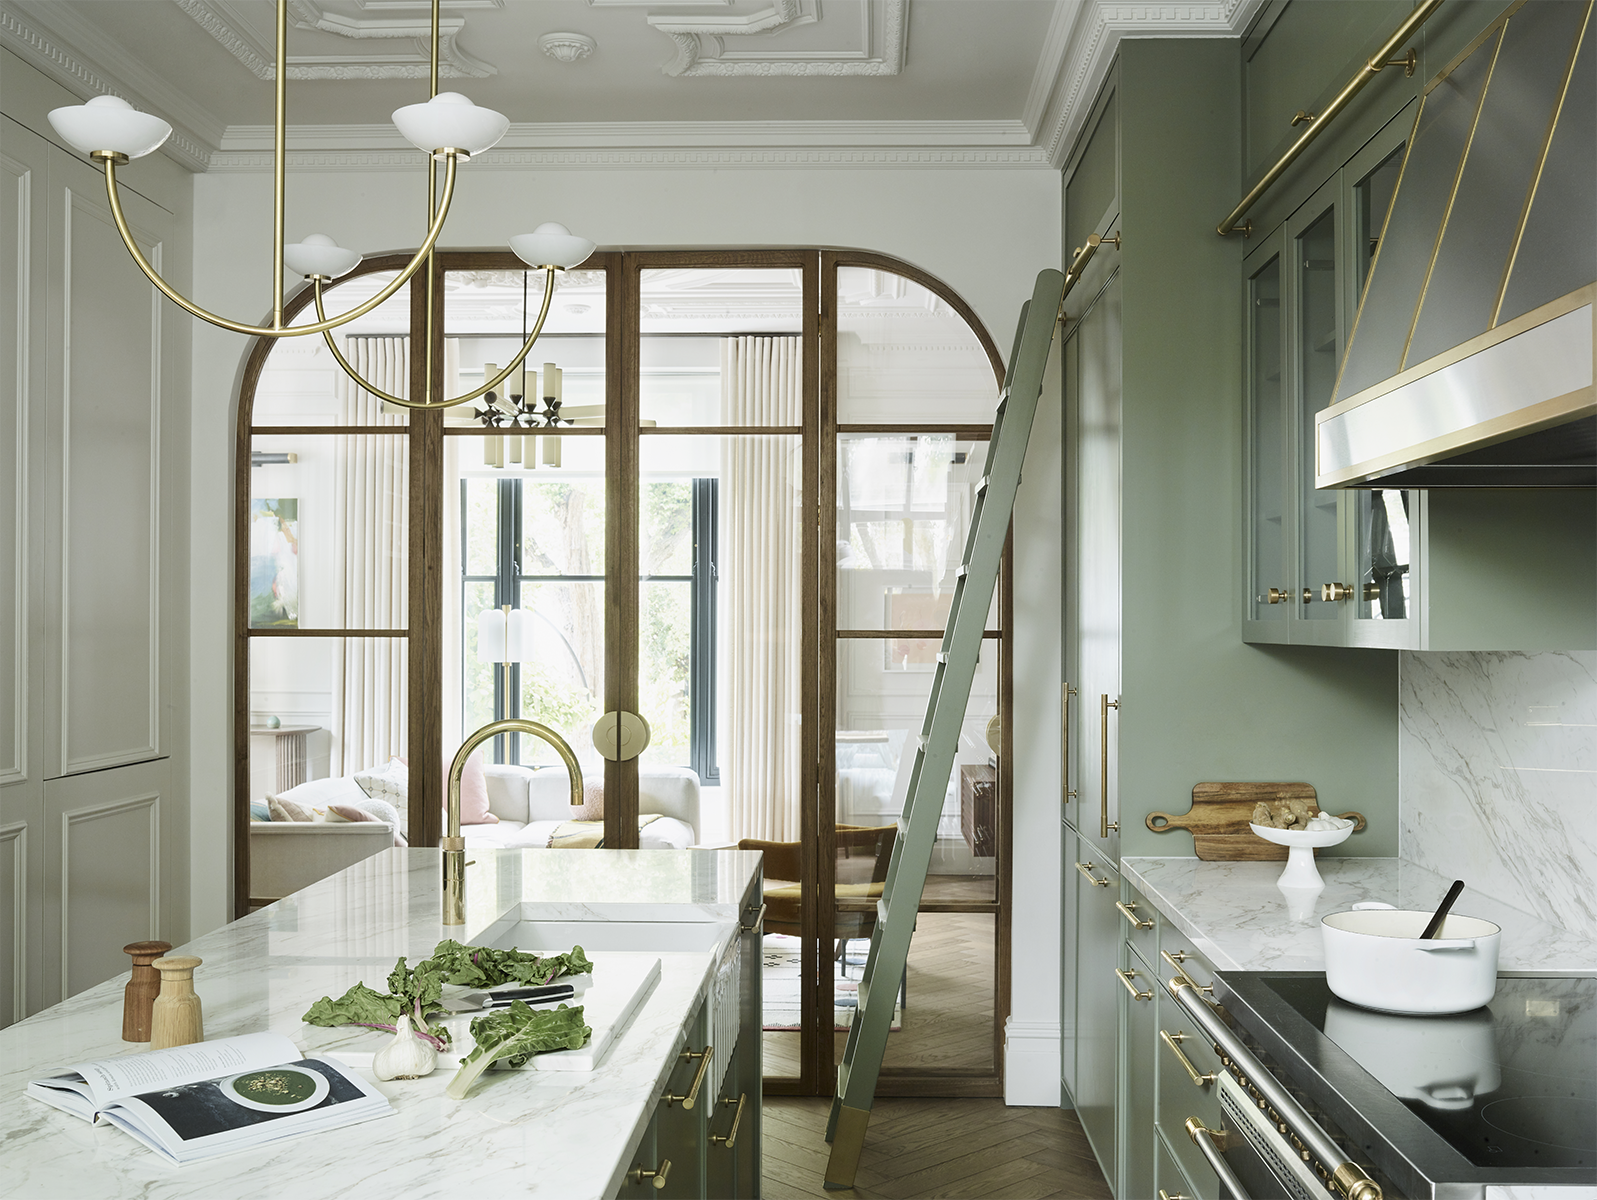 Green kitchen ideas: 16 kitchens in sage, olive and apple